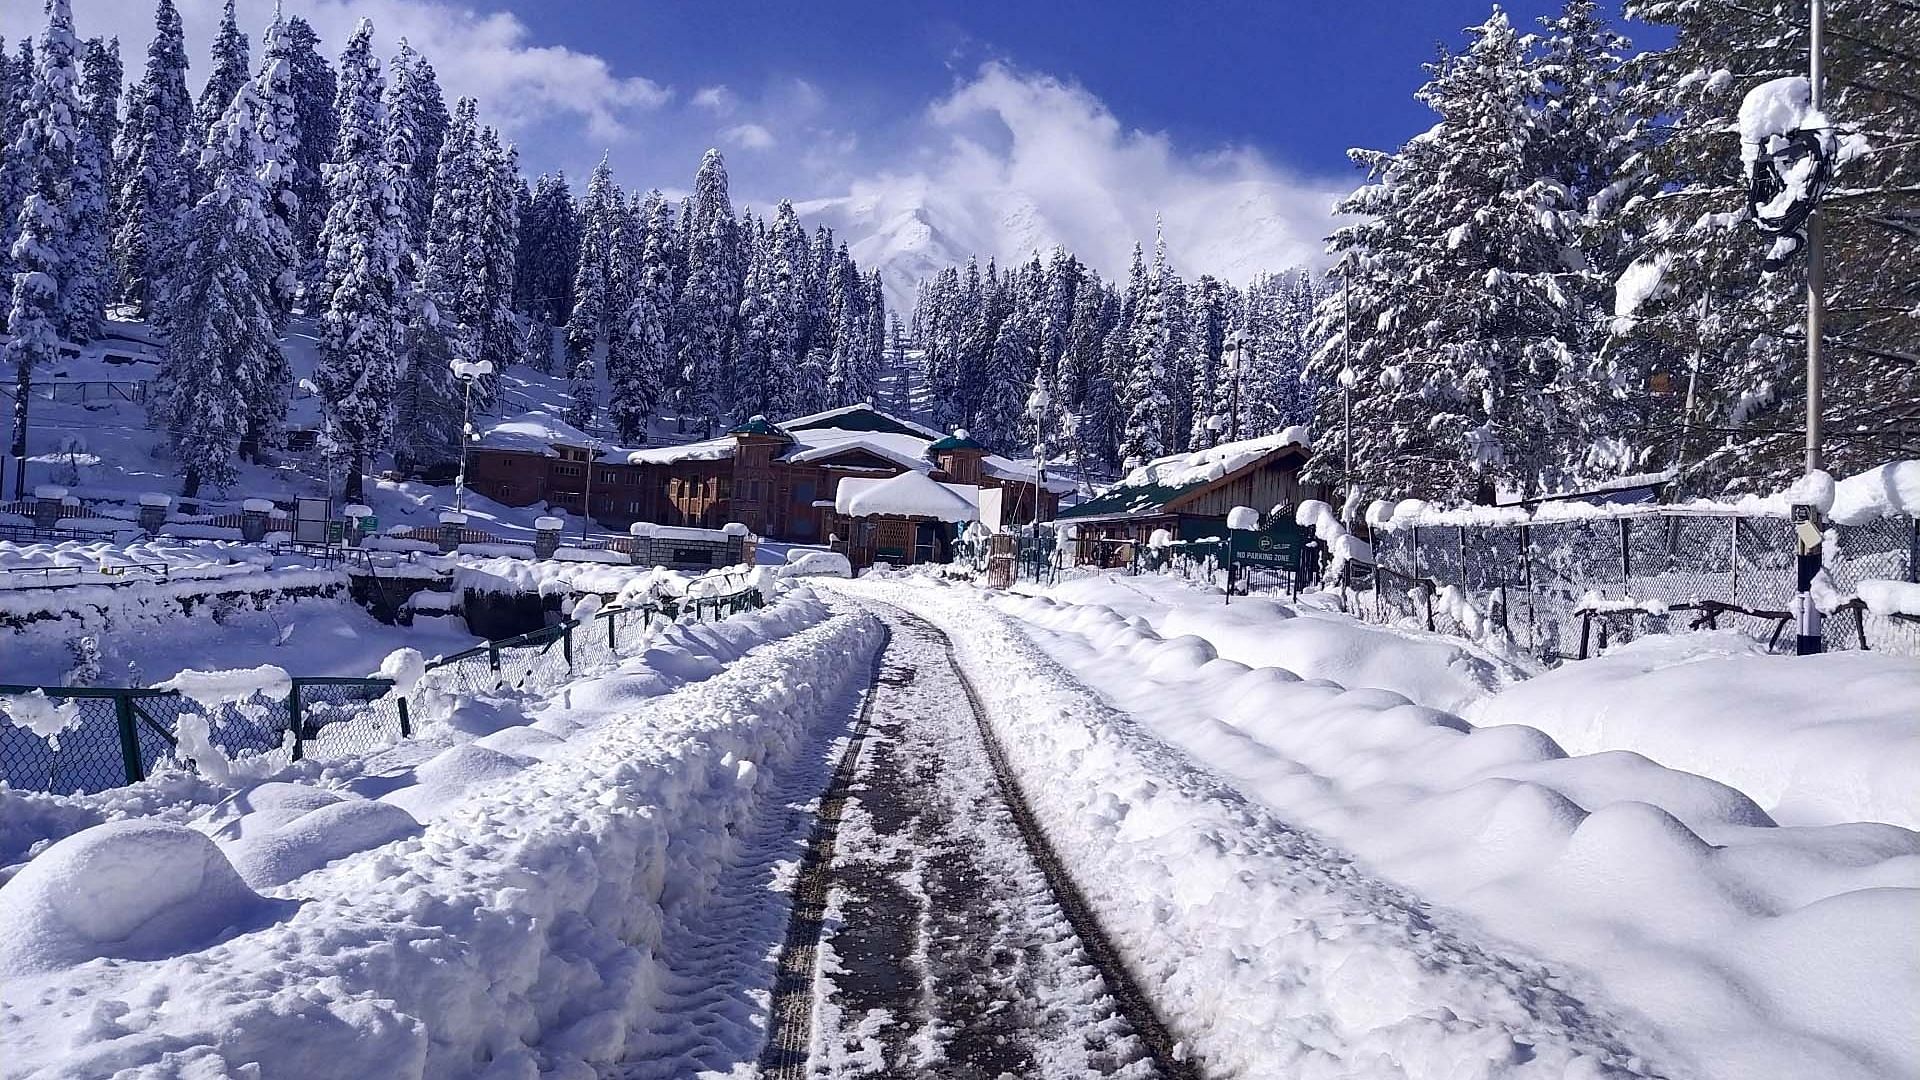 Gulmarg has seen its first snow of the season.